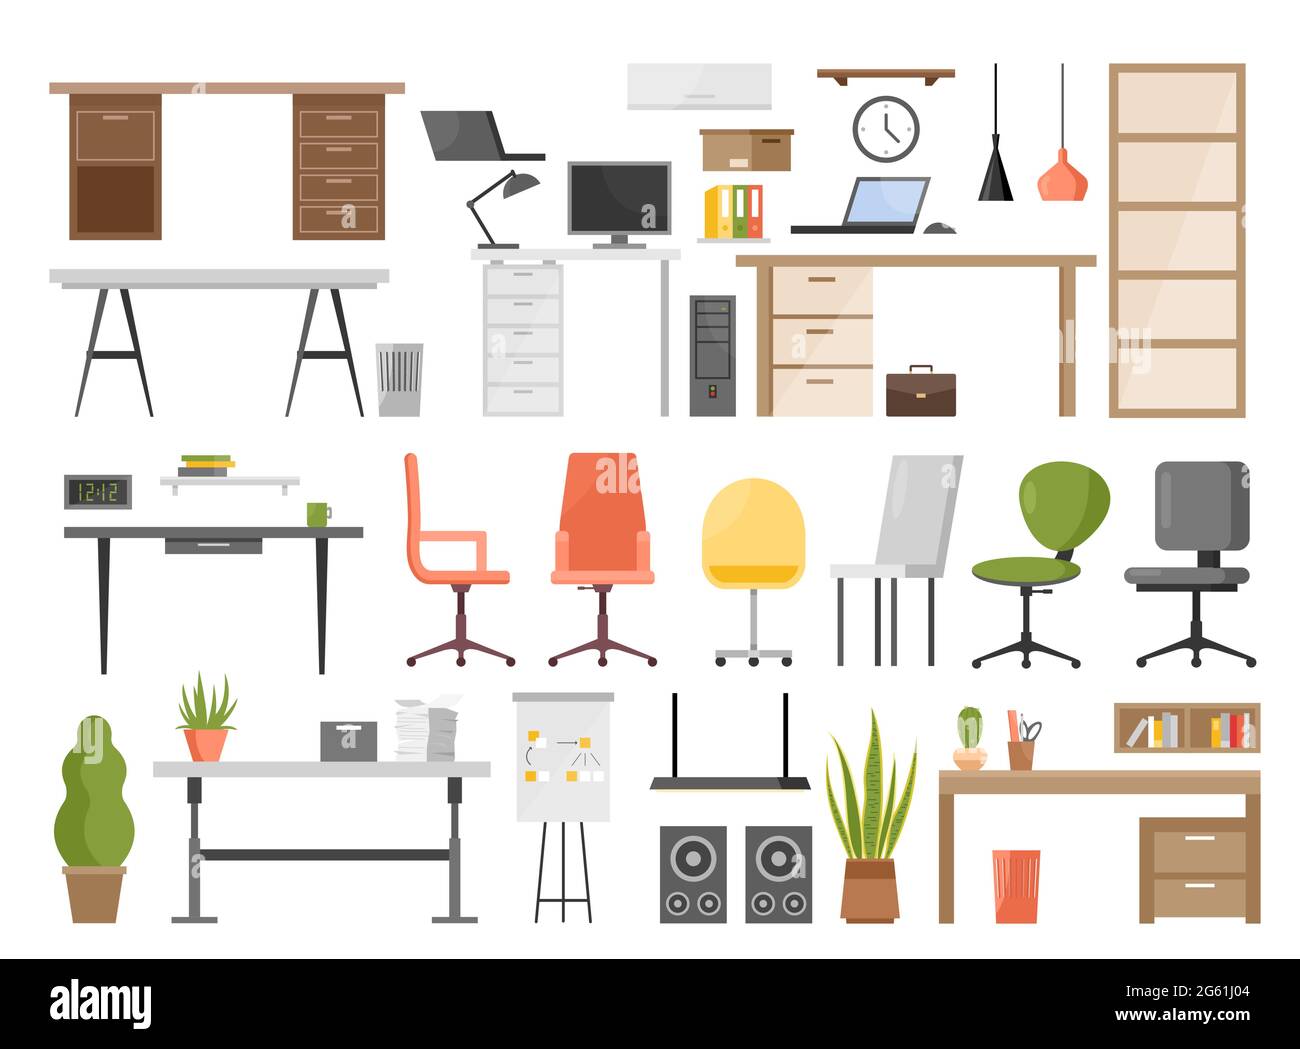 Office furniture vector illustration set isolated on white. Cartoon ergonomic furnishing objects for modern interior design collection with chair and Stock Vector